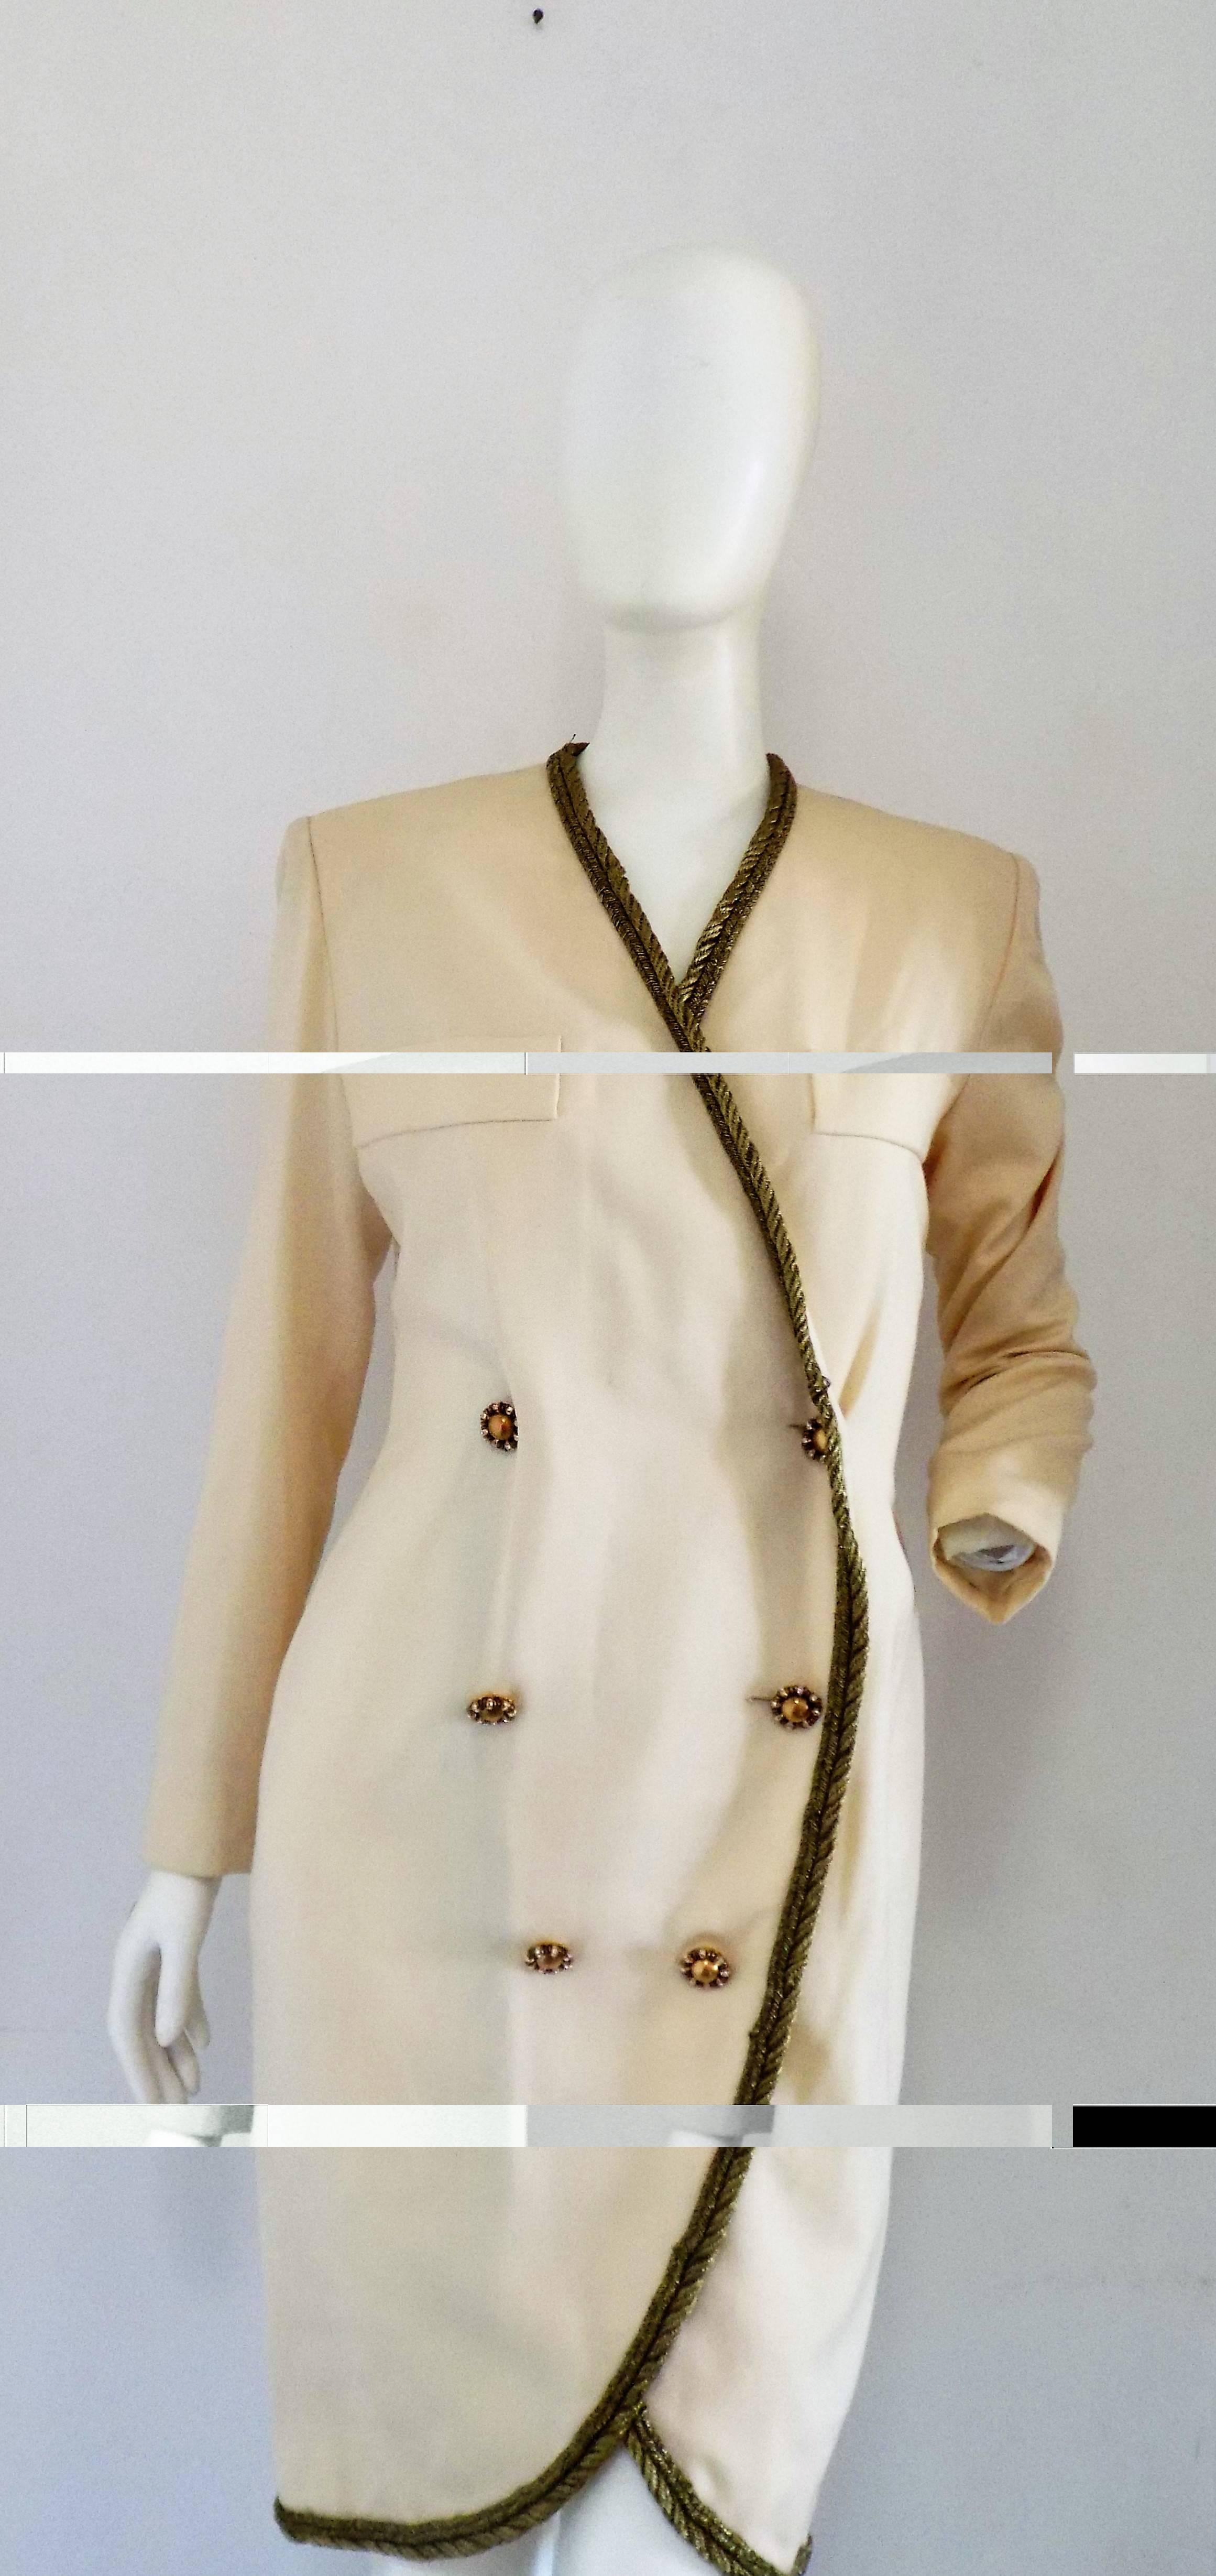 Verri Long Cream Blazer NWOT

Long beije blazer chemise still with tags totally made in italy in italian size range 44
Composition: 100% Wool